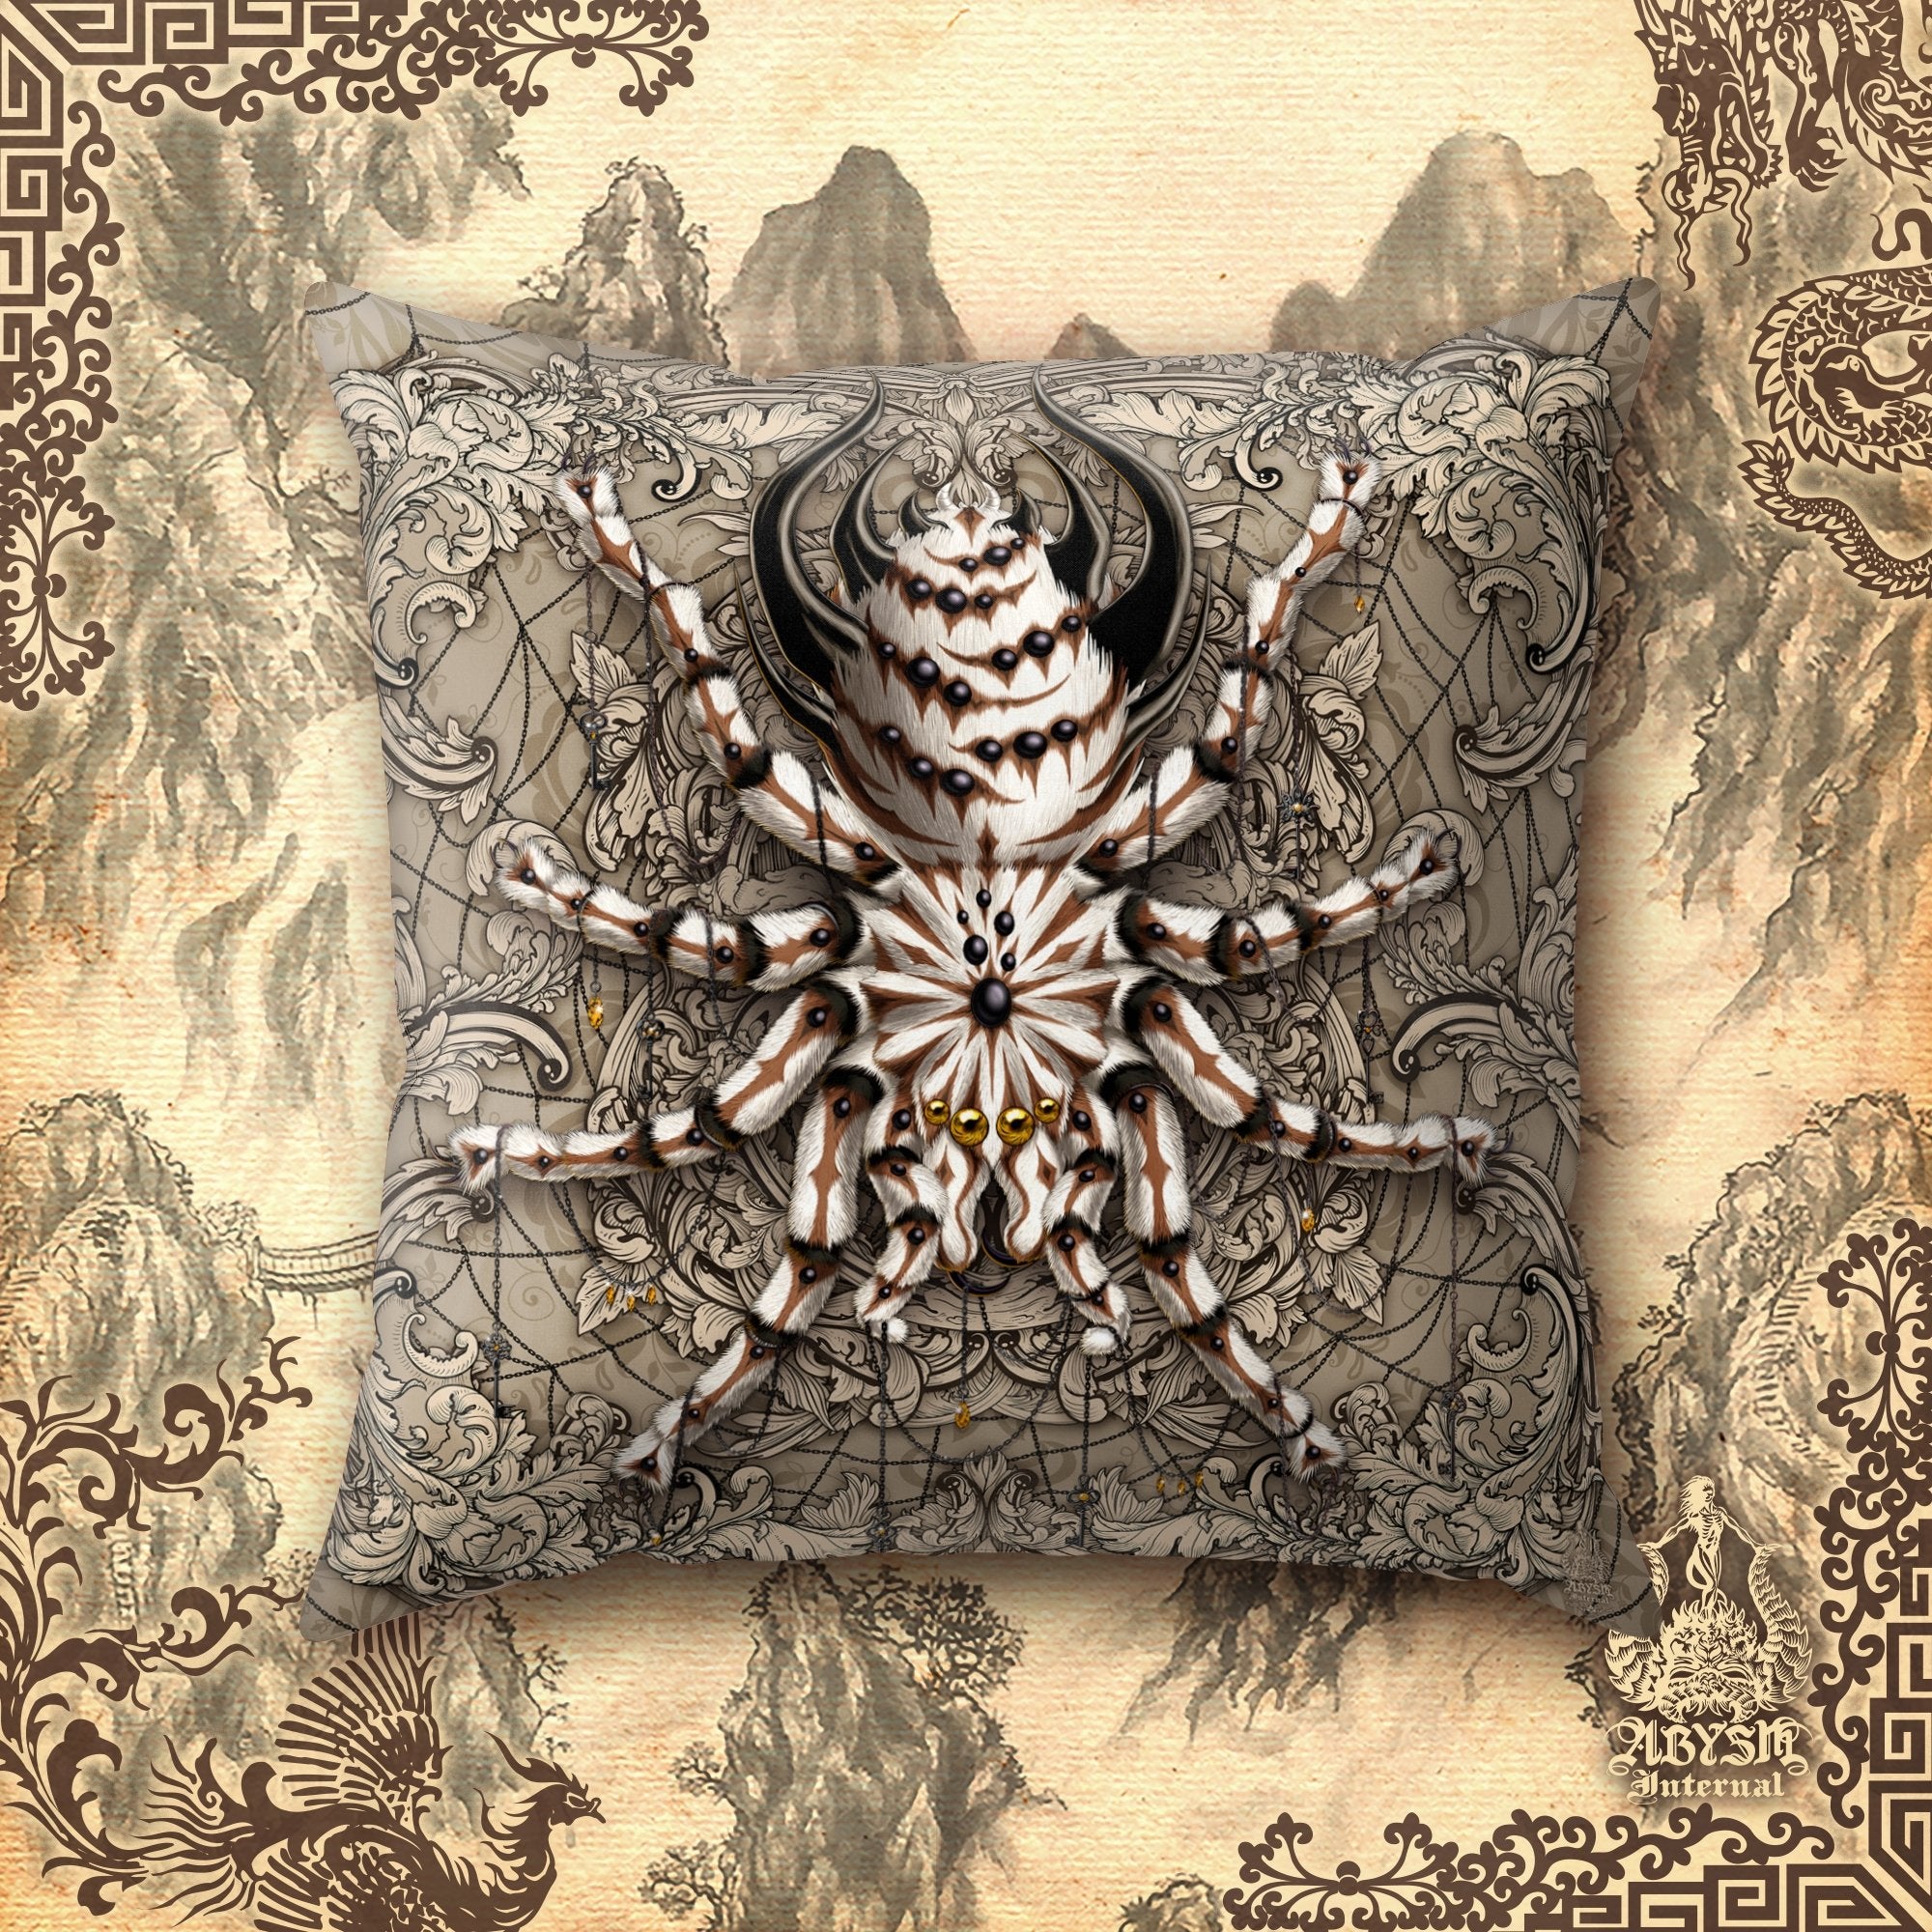 Spider Throw Pillow, Decorative Accent Cushion, Indie Room Decor, Alternative, Funky and Eclectic Home - Tarantula, Cream - Abysm Internal